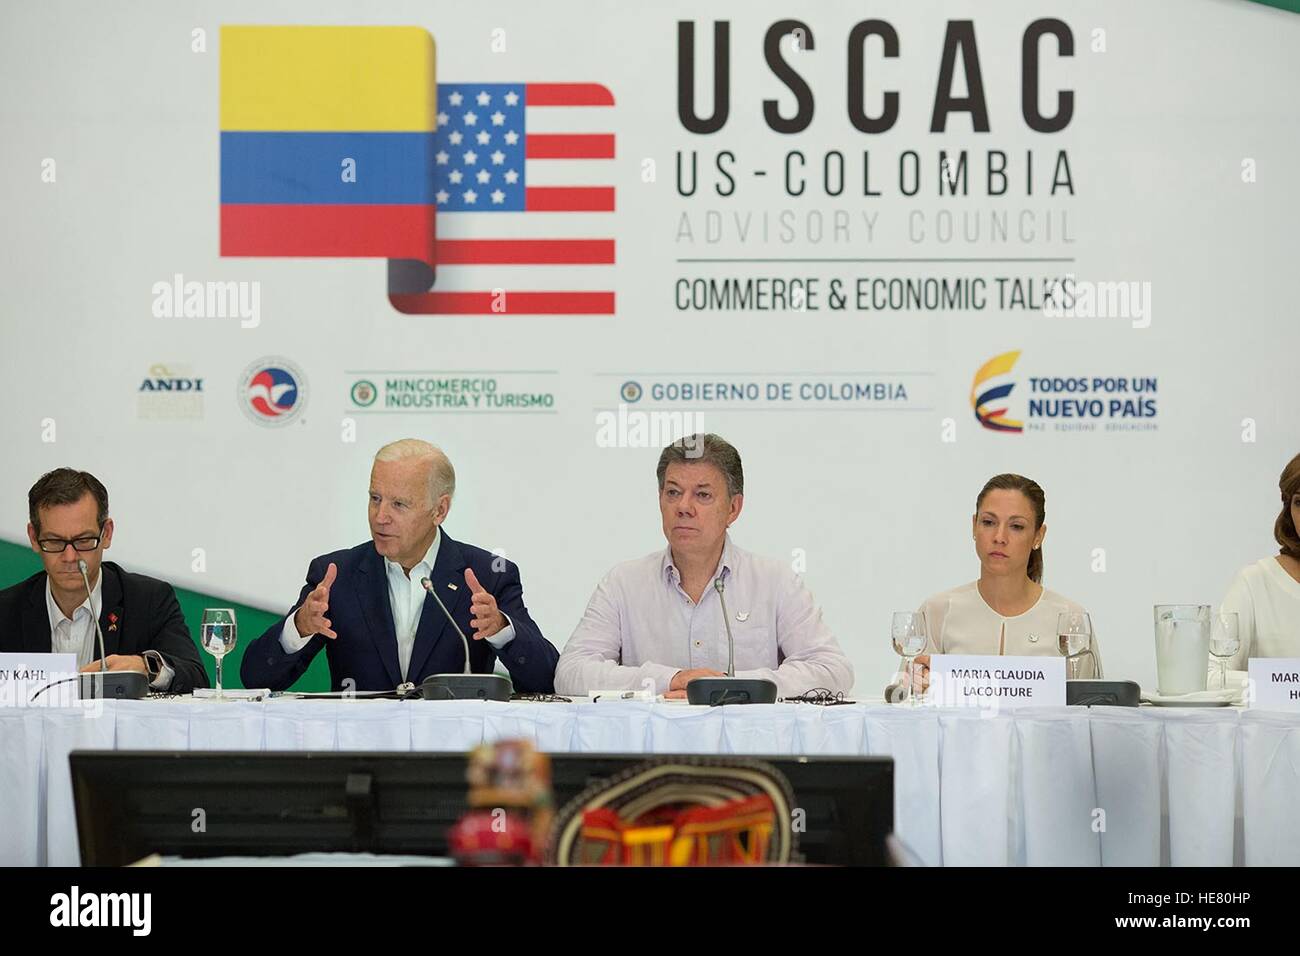 U.S. Vice President Joe Biden speaks at the United State-Colombia Commerce and Economic talks during the U.S.-Colombia Advisory Council Meeting December 2, 2016 in Cartagena, Colombia. Stock Photo